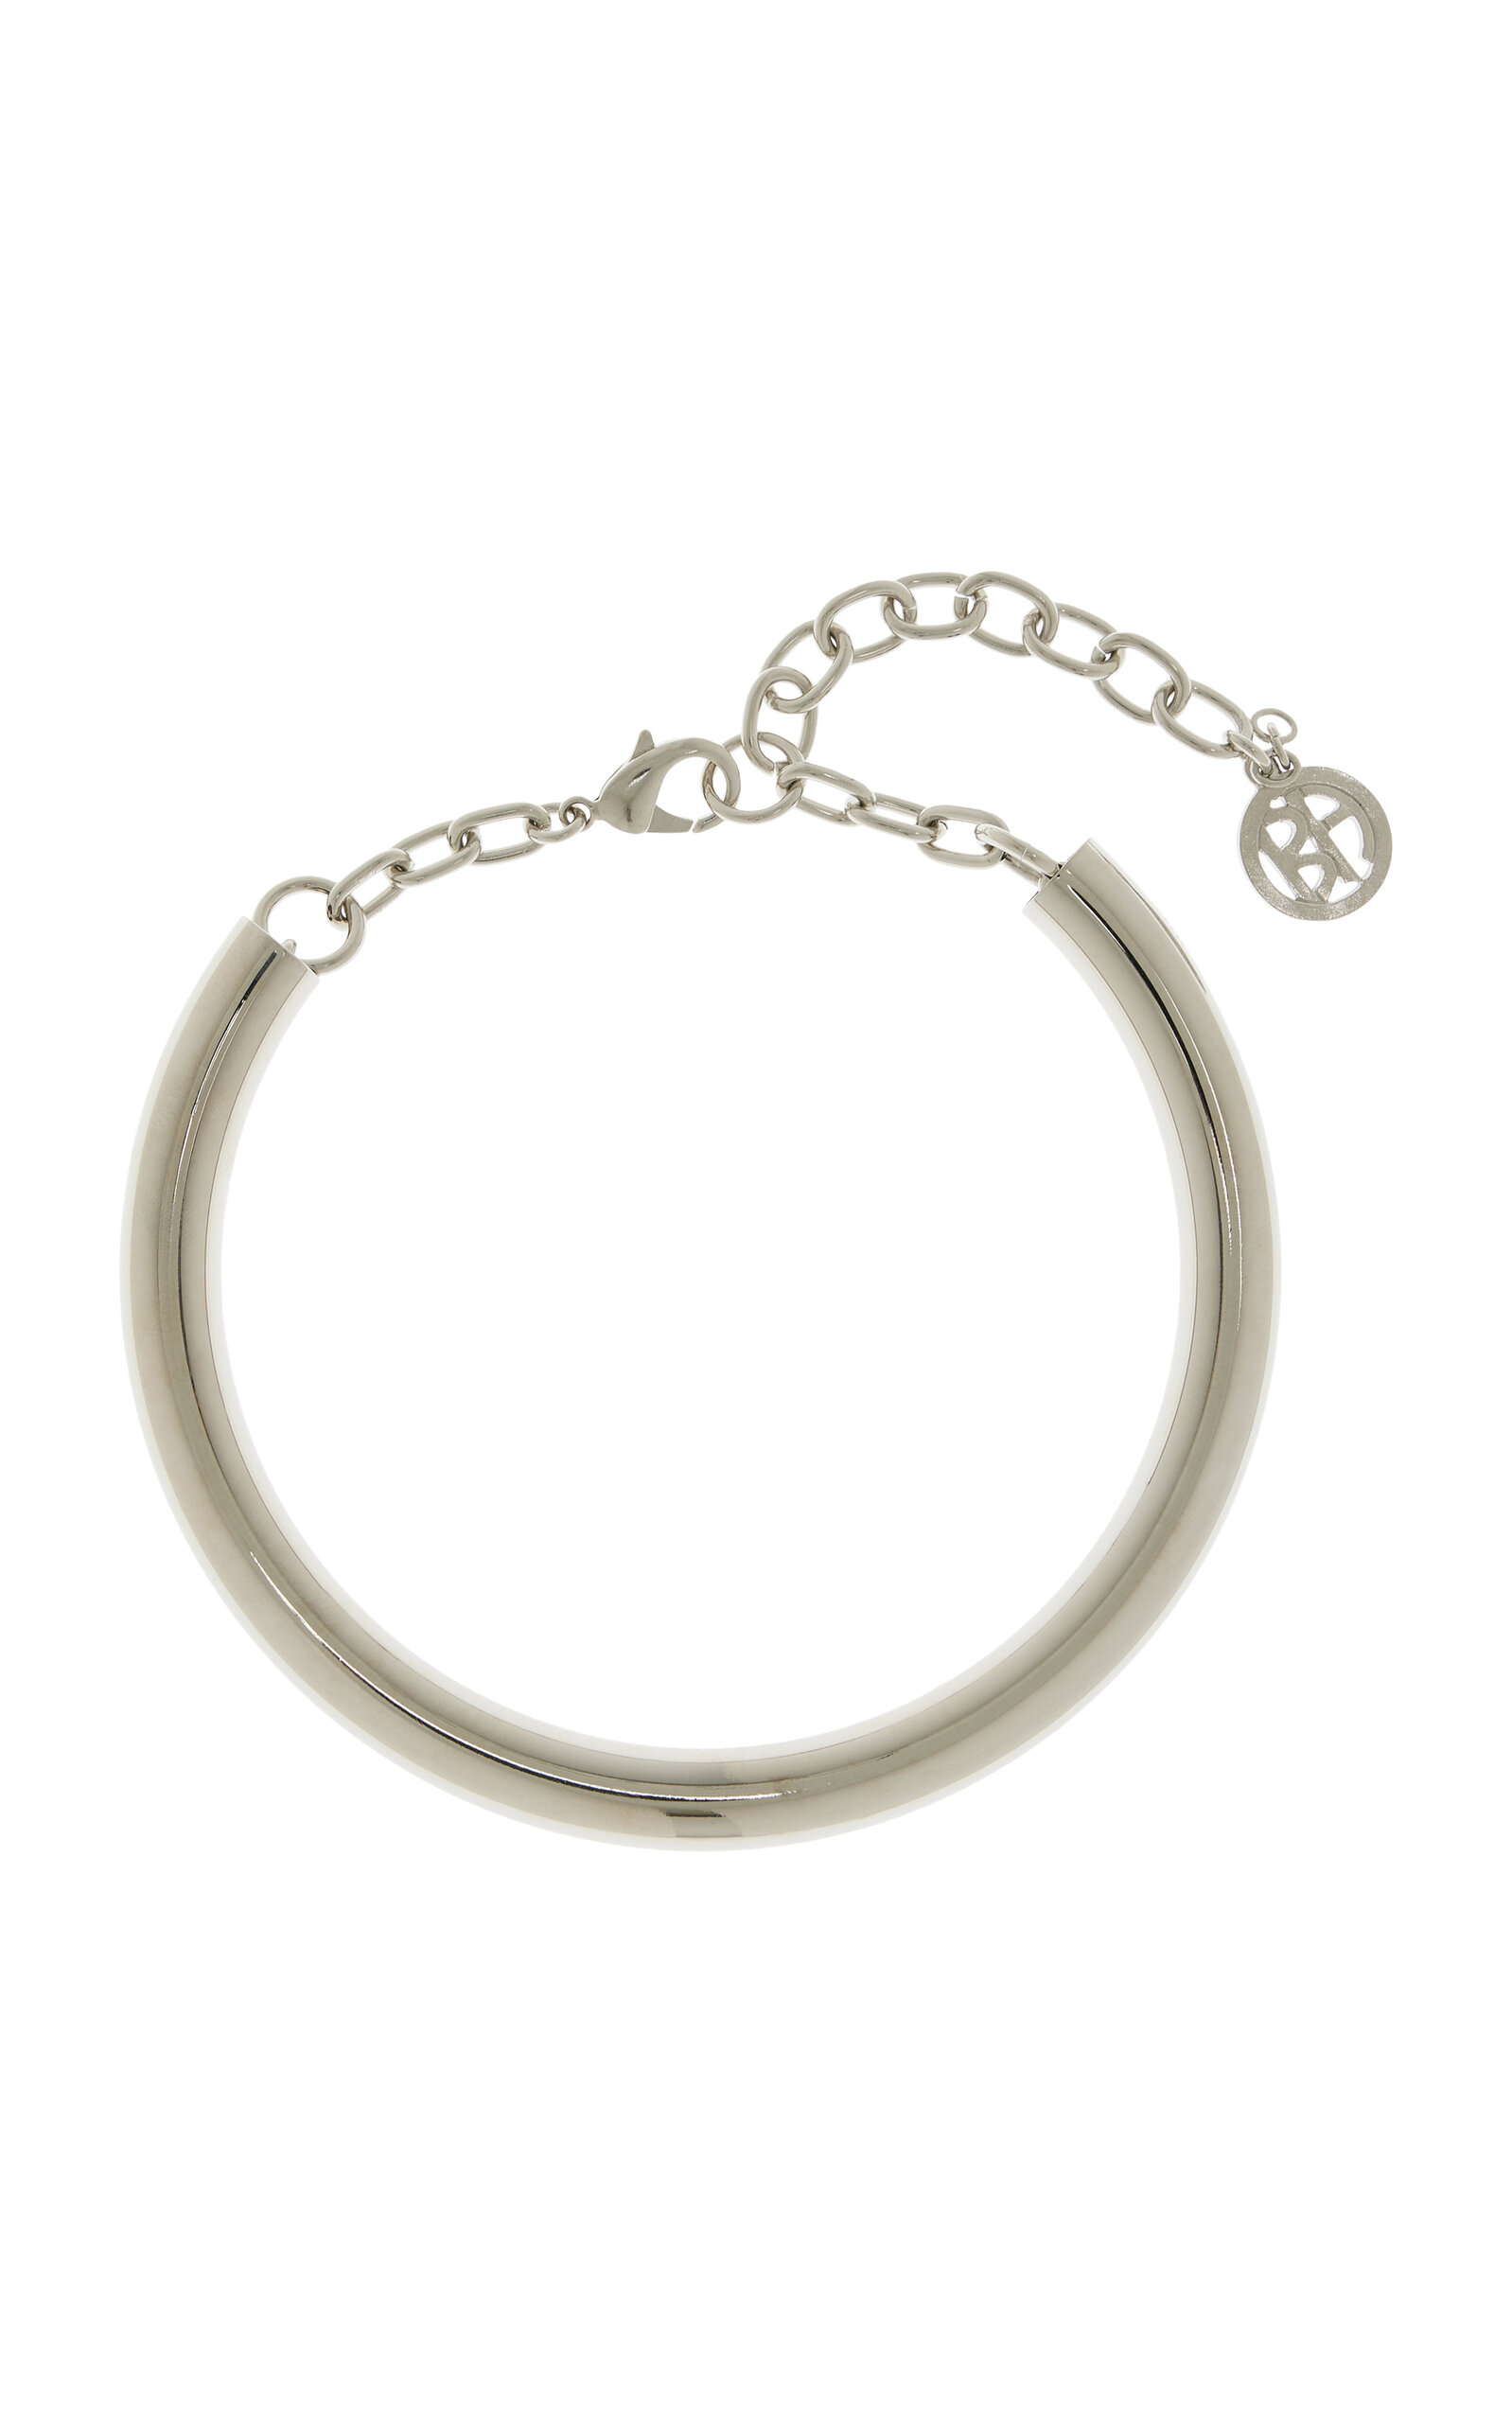 Exclusive Tubular 24K White Gold-Plated Necklace